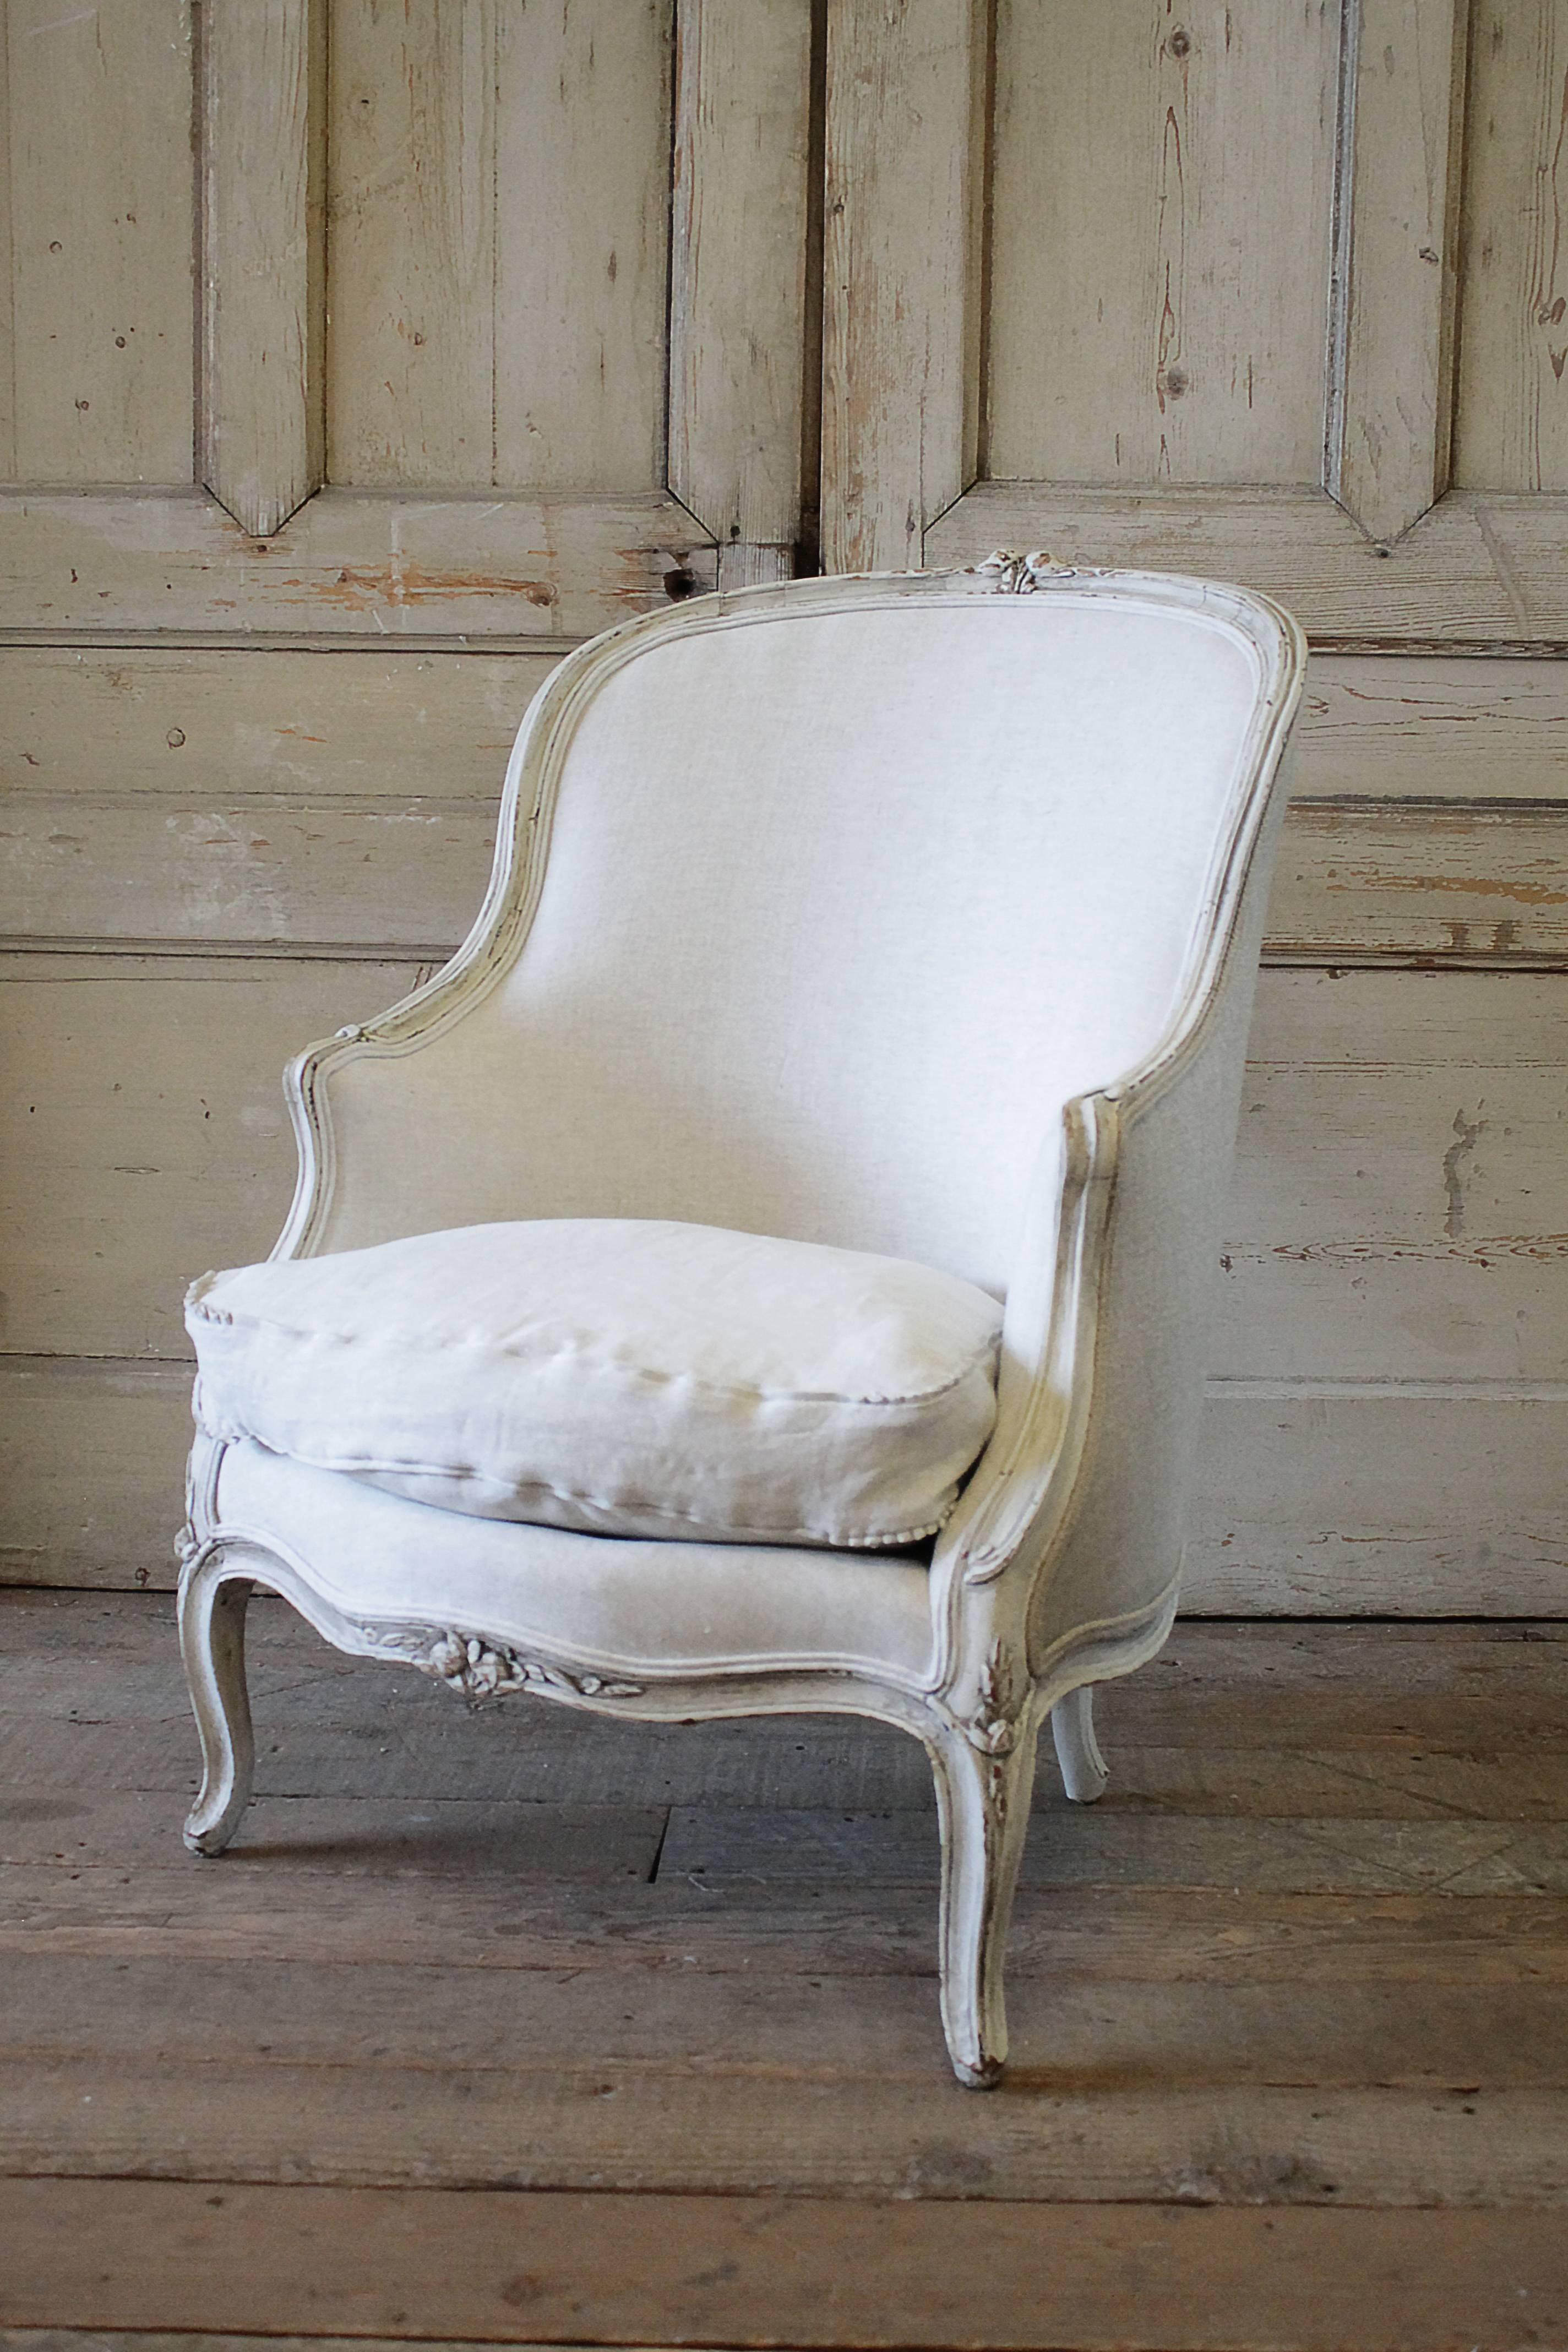 Lovely 19th century bergere chair painted in our oyster white finish with distressed edges, and antique glaze finish. The frame has a greyish tone patina. We reupholstered this chair in a soft heavy Belgian linen, the color is greige, which is a